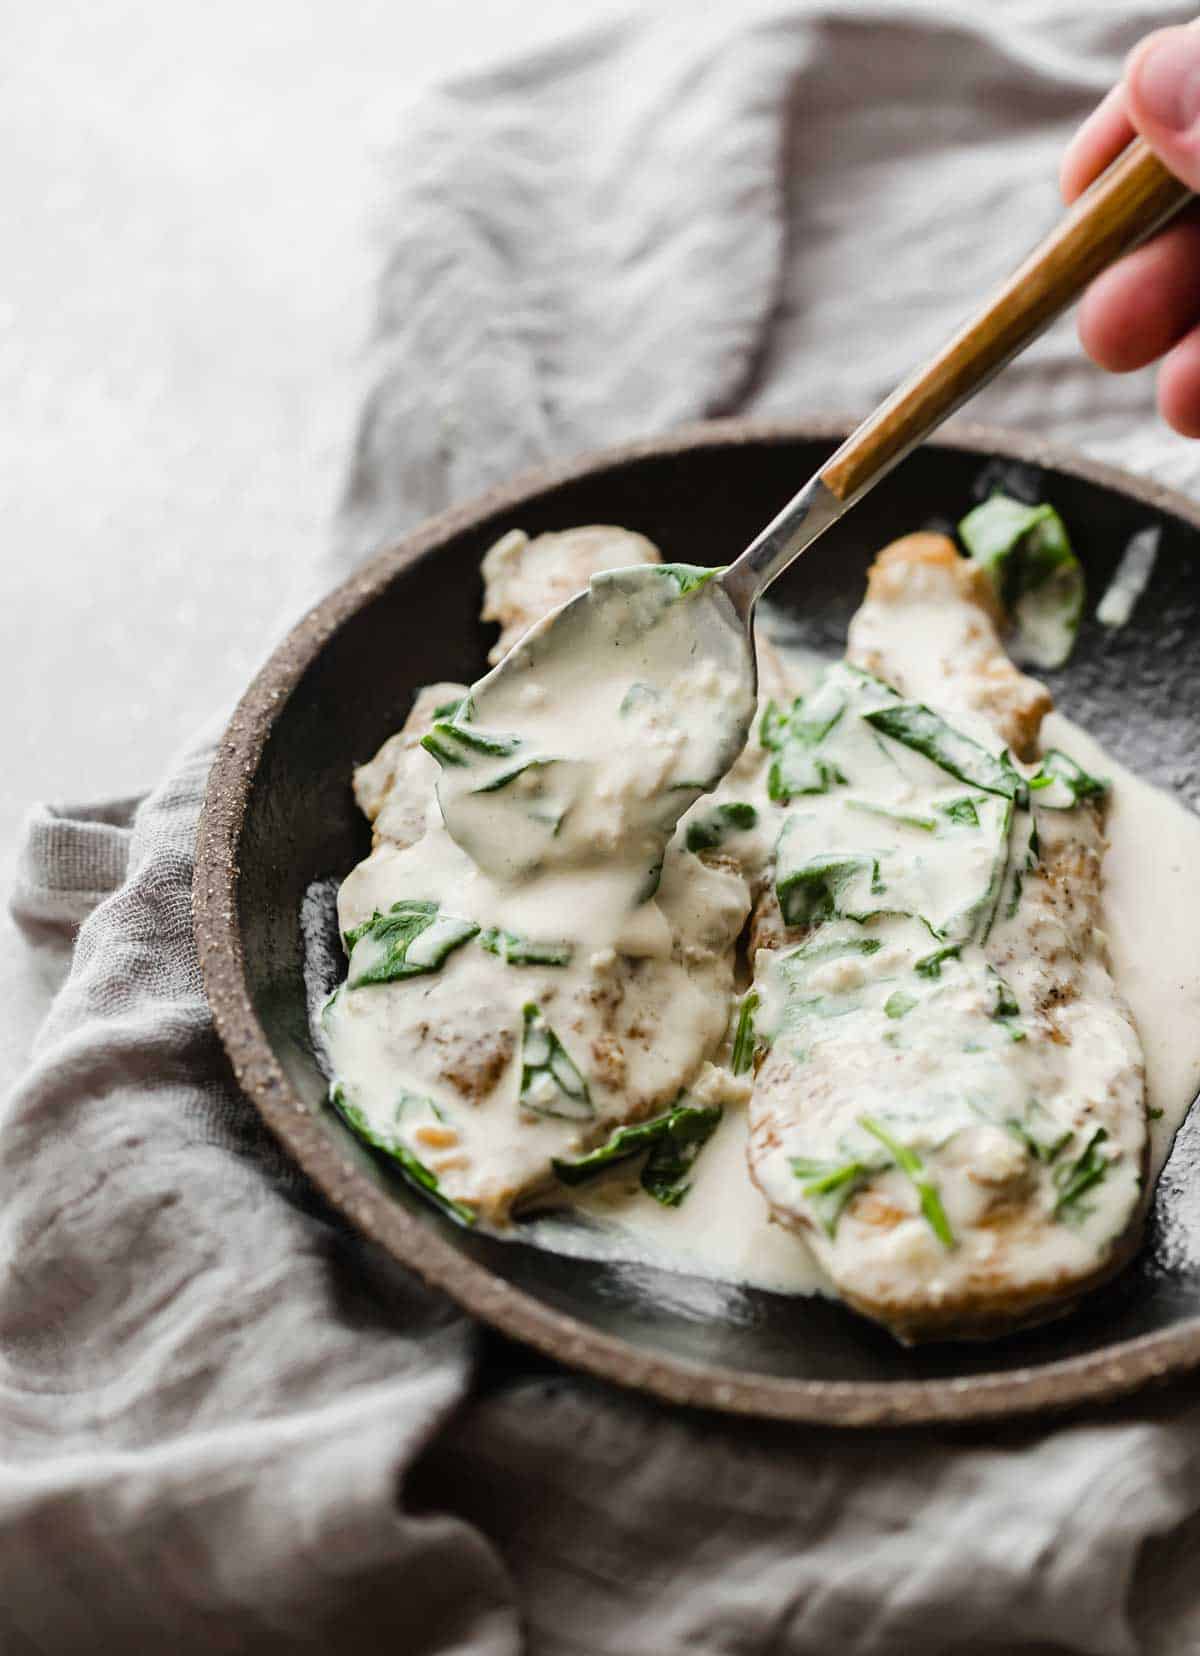 A spoon scooping a creamy spinach sauce overtop a plate of Chicken Dijon Recipe.